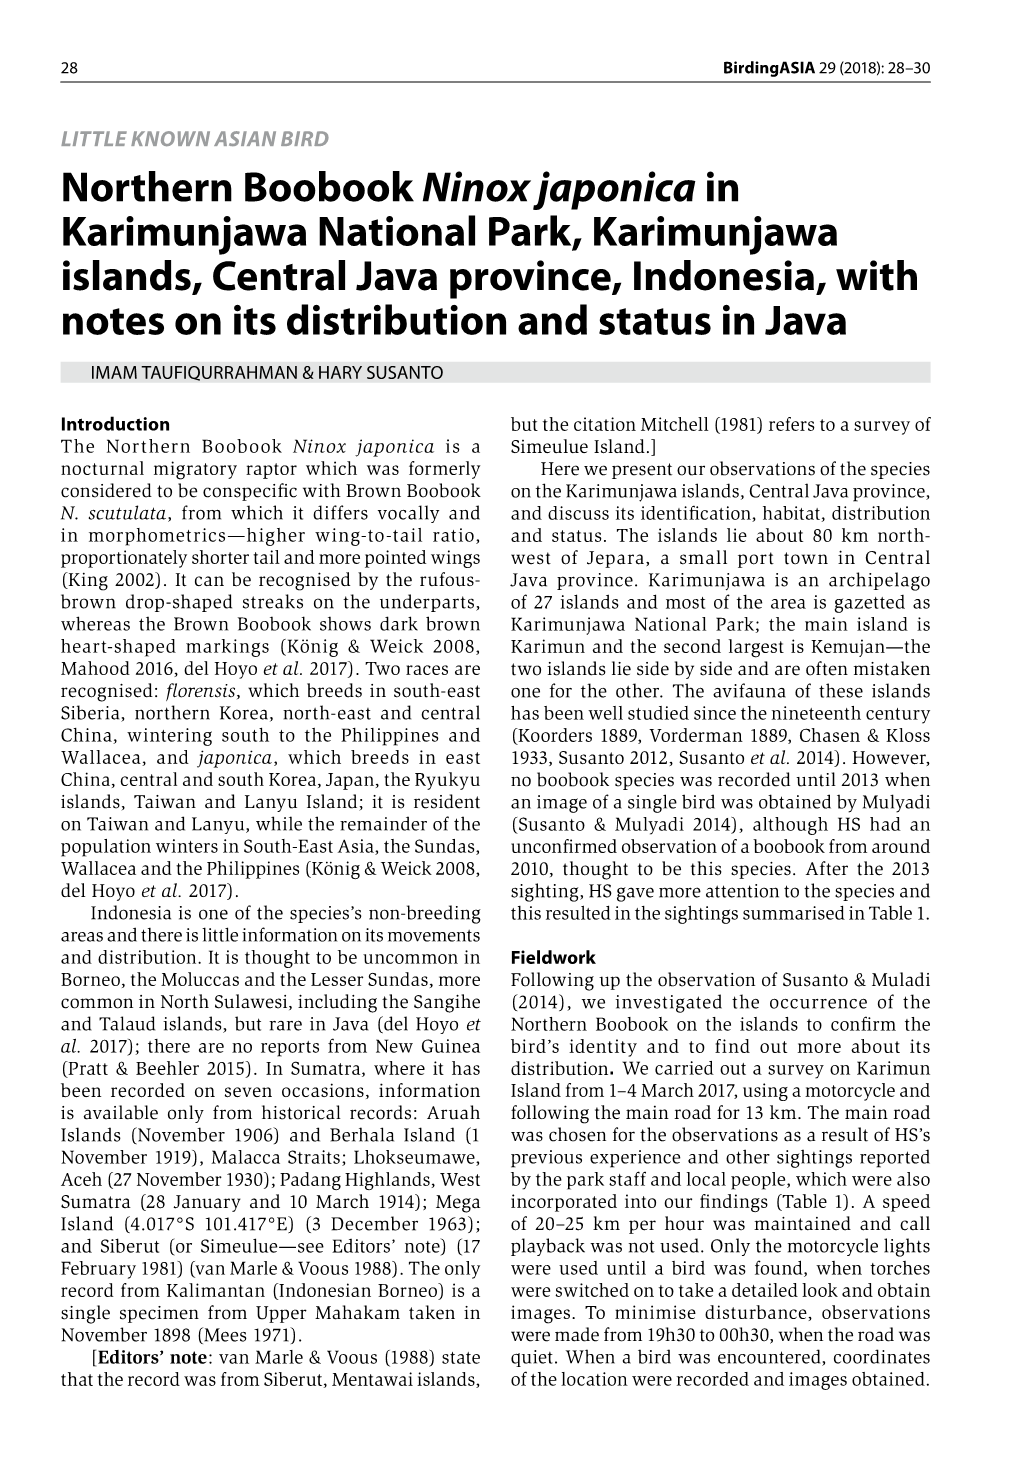 Northern Boobook Ninox Japonica in Karimunjawa National Park, Karimunjawa Islands, Central Java Province, Indonesia, with Notes on Its Distribution and Status in Java